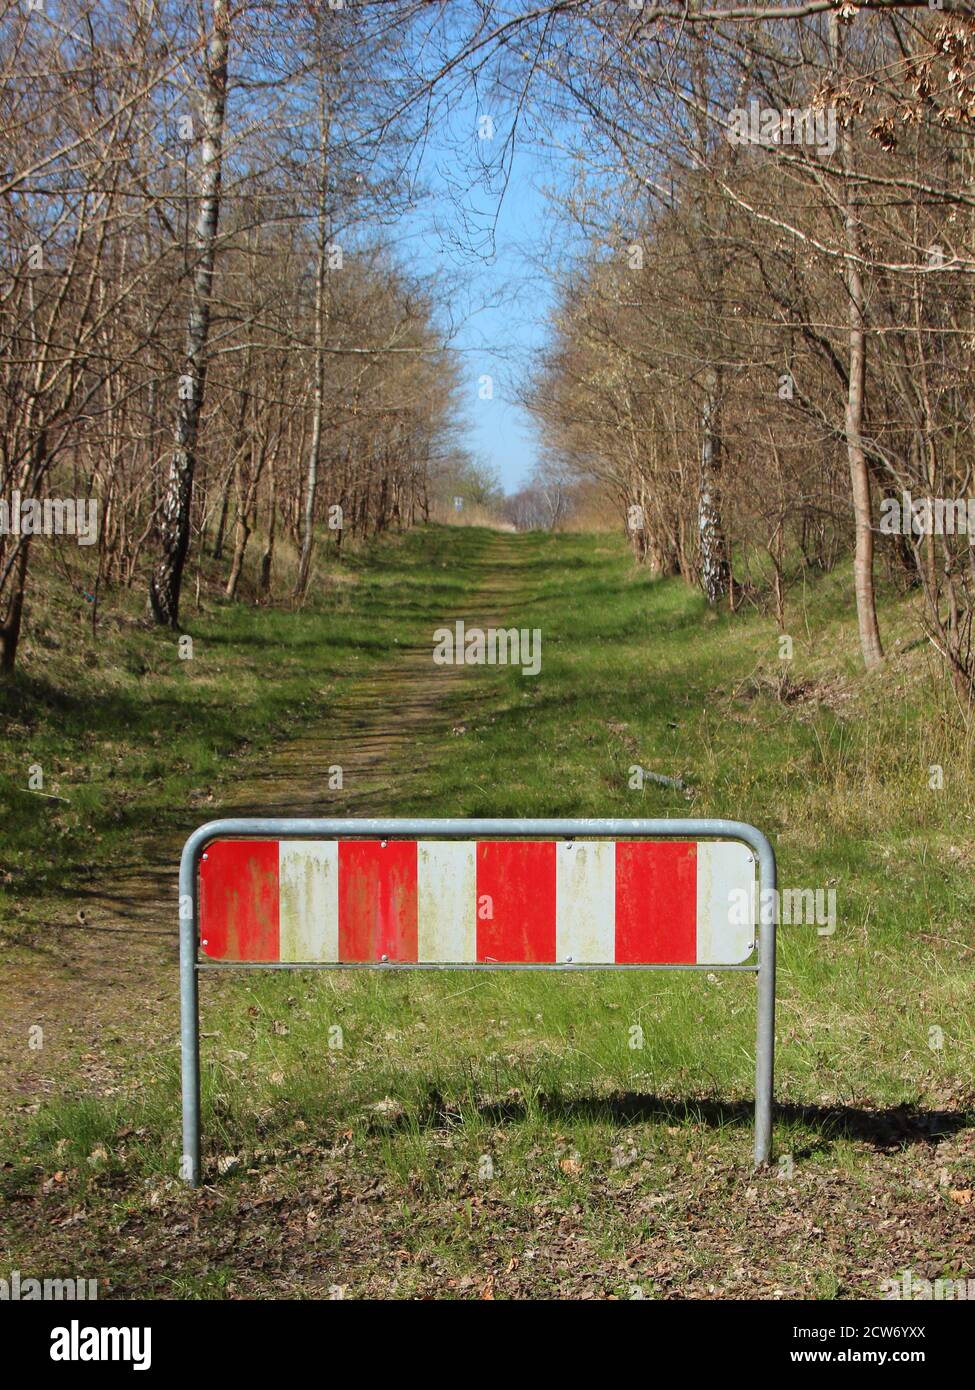 A road end sign with red and white stripes, surrounded by trees on both sides. Stock Photo